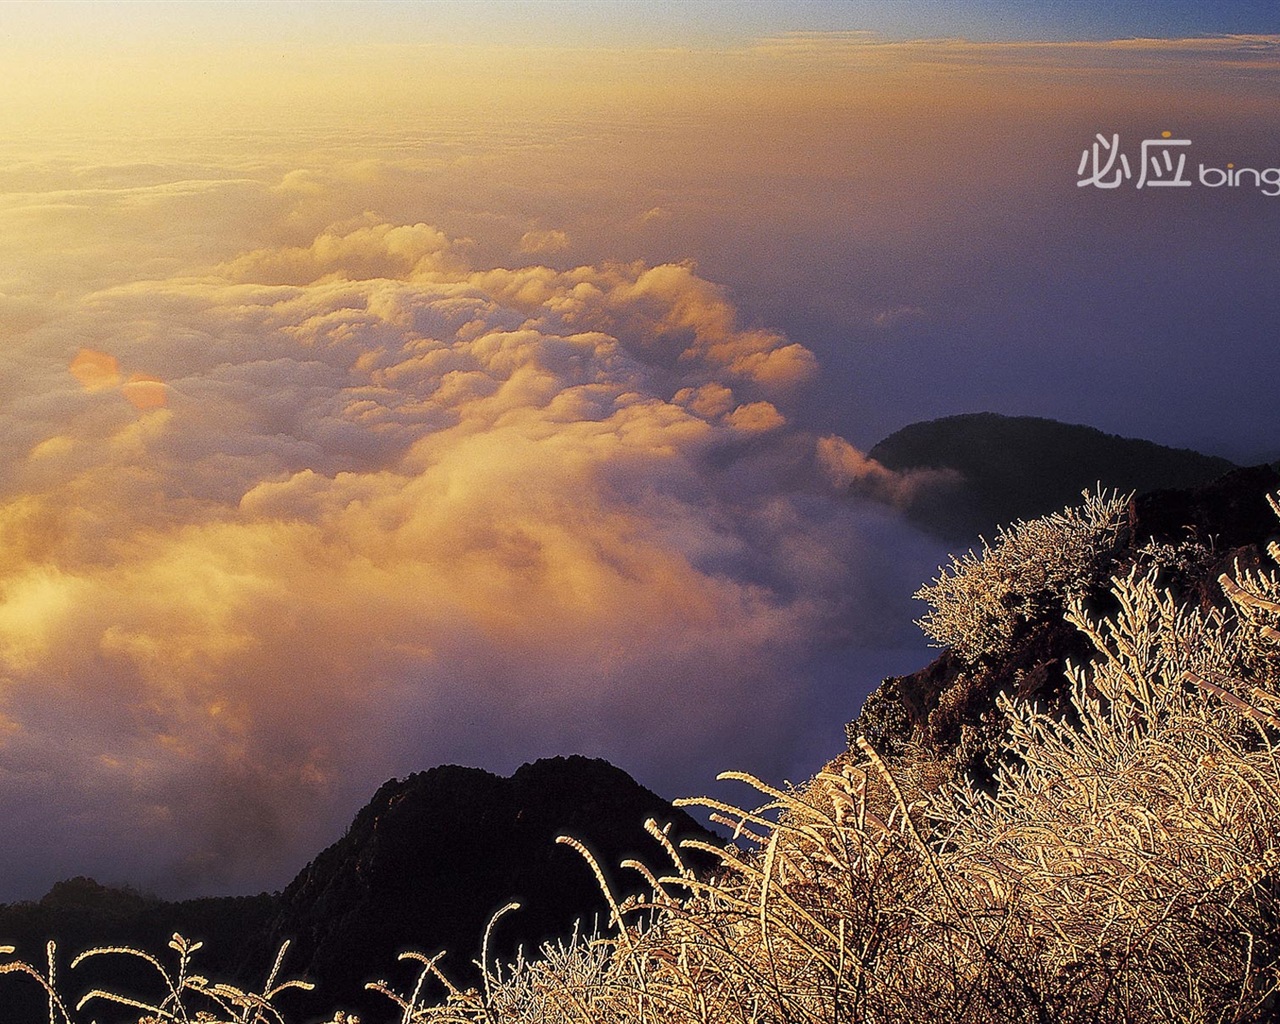 Bing selection best HD wallpapers: China theme wallpaper (2) #14 - 1280x1024